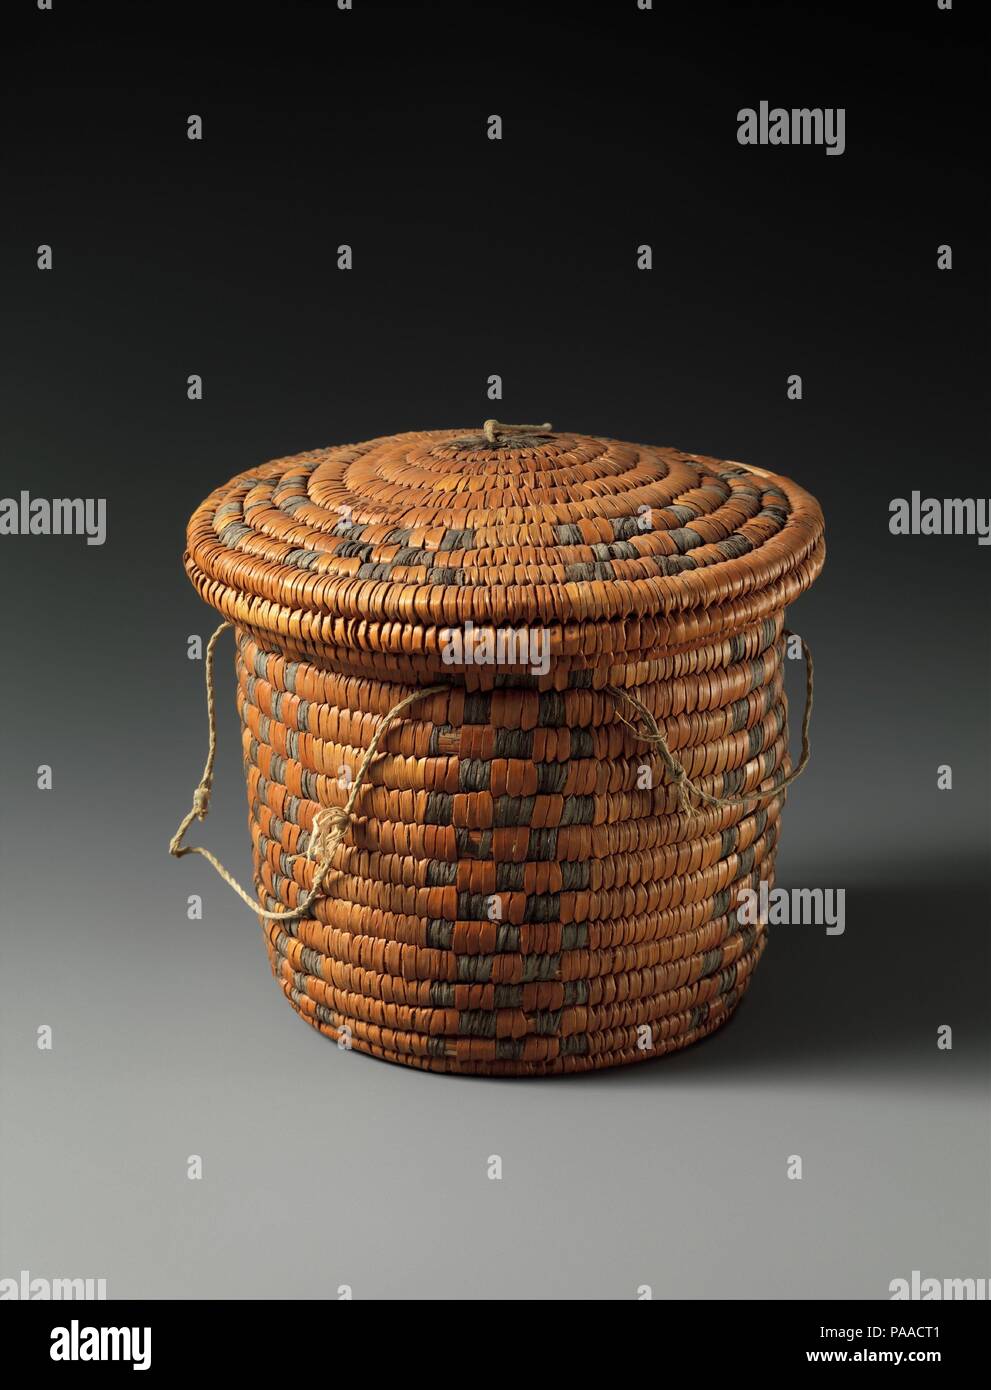 Cylindrical Coil Basket and Lid. Dimensions: Basket: H. 10.6 cm (4 6/16 in.); Diam. 11 cm (4 5/16 in.)  Lid: H. 3.2 cm (1 1/4 in.); Diam. 13 cm (5 1/8 in.). Dynasty: Dynasty 11. Date: ca. 2124-2000 B.C..  This cylindrical basket with a matching lid was found to the right of the door of an Eleventh Dynasty tomb. Nested inside the basket was another smaller basket of similar shape. When the excavators opened the two containers, they were surprised to find a small collection of personal objects, including bits of malachite wrapped in a piece of linen cloth, a lump of wax, raisins, several pieces  Stock Photo